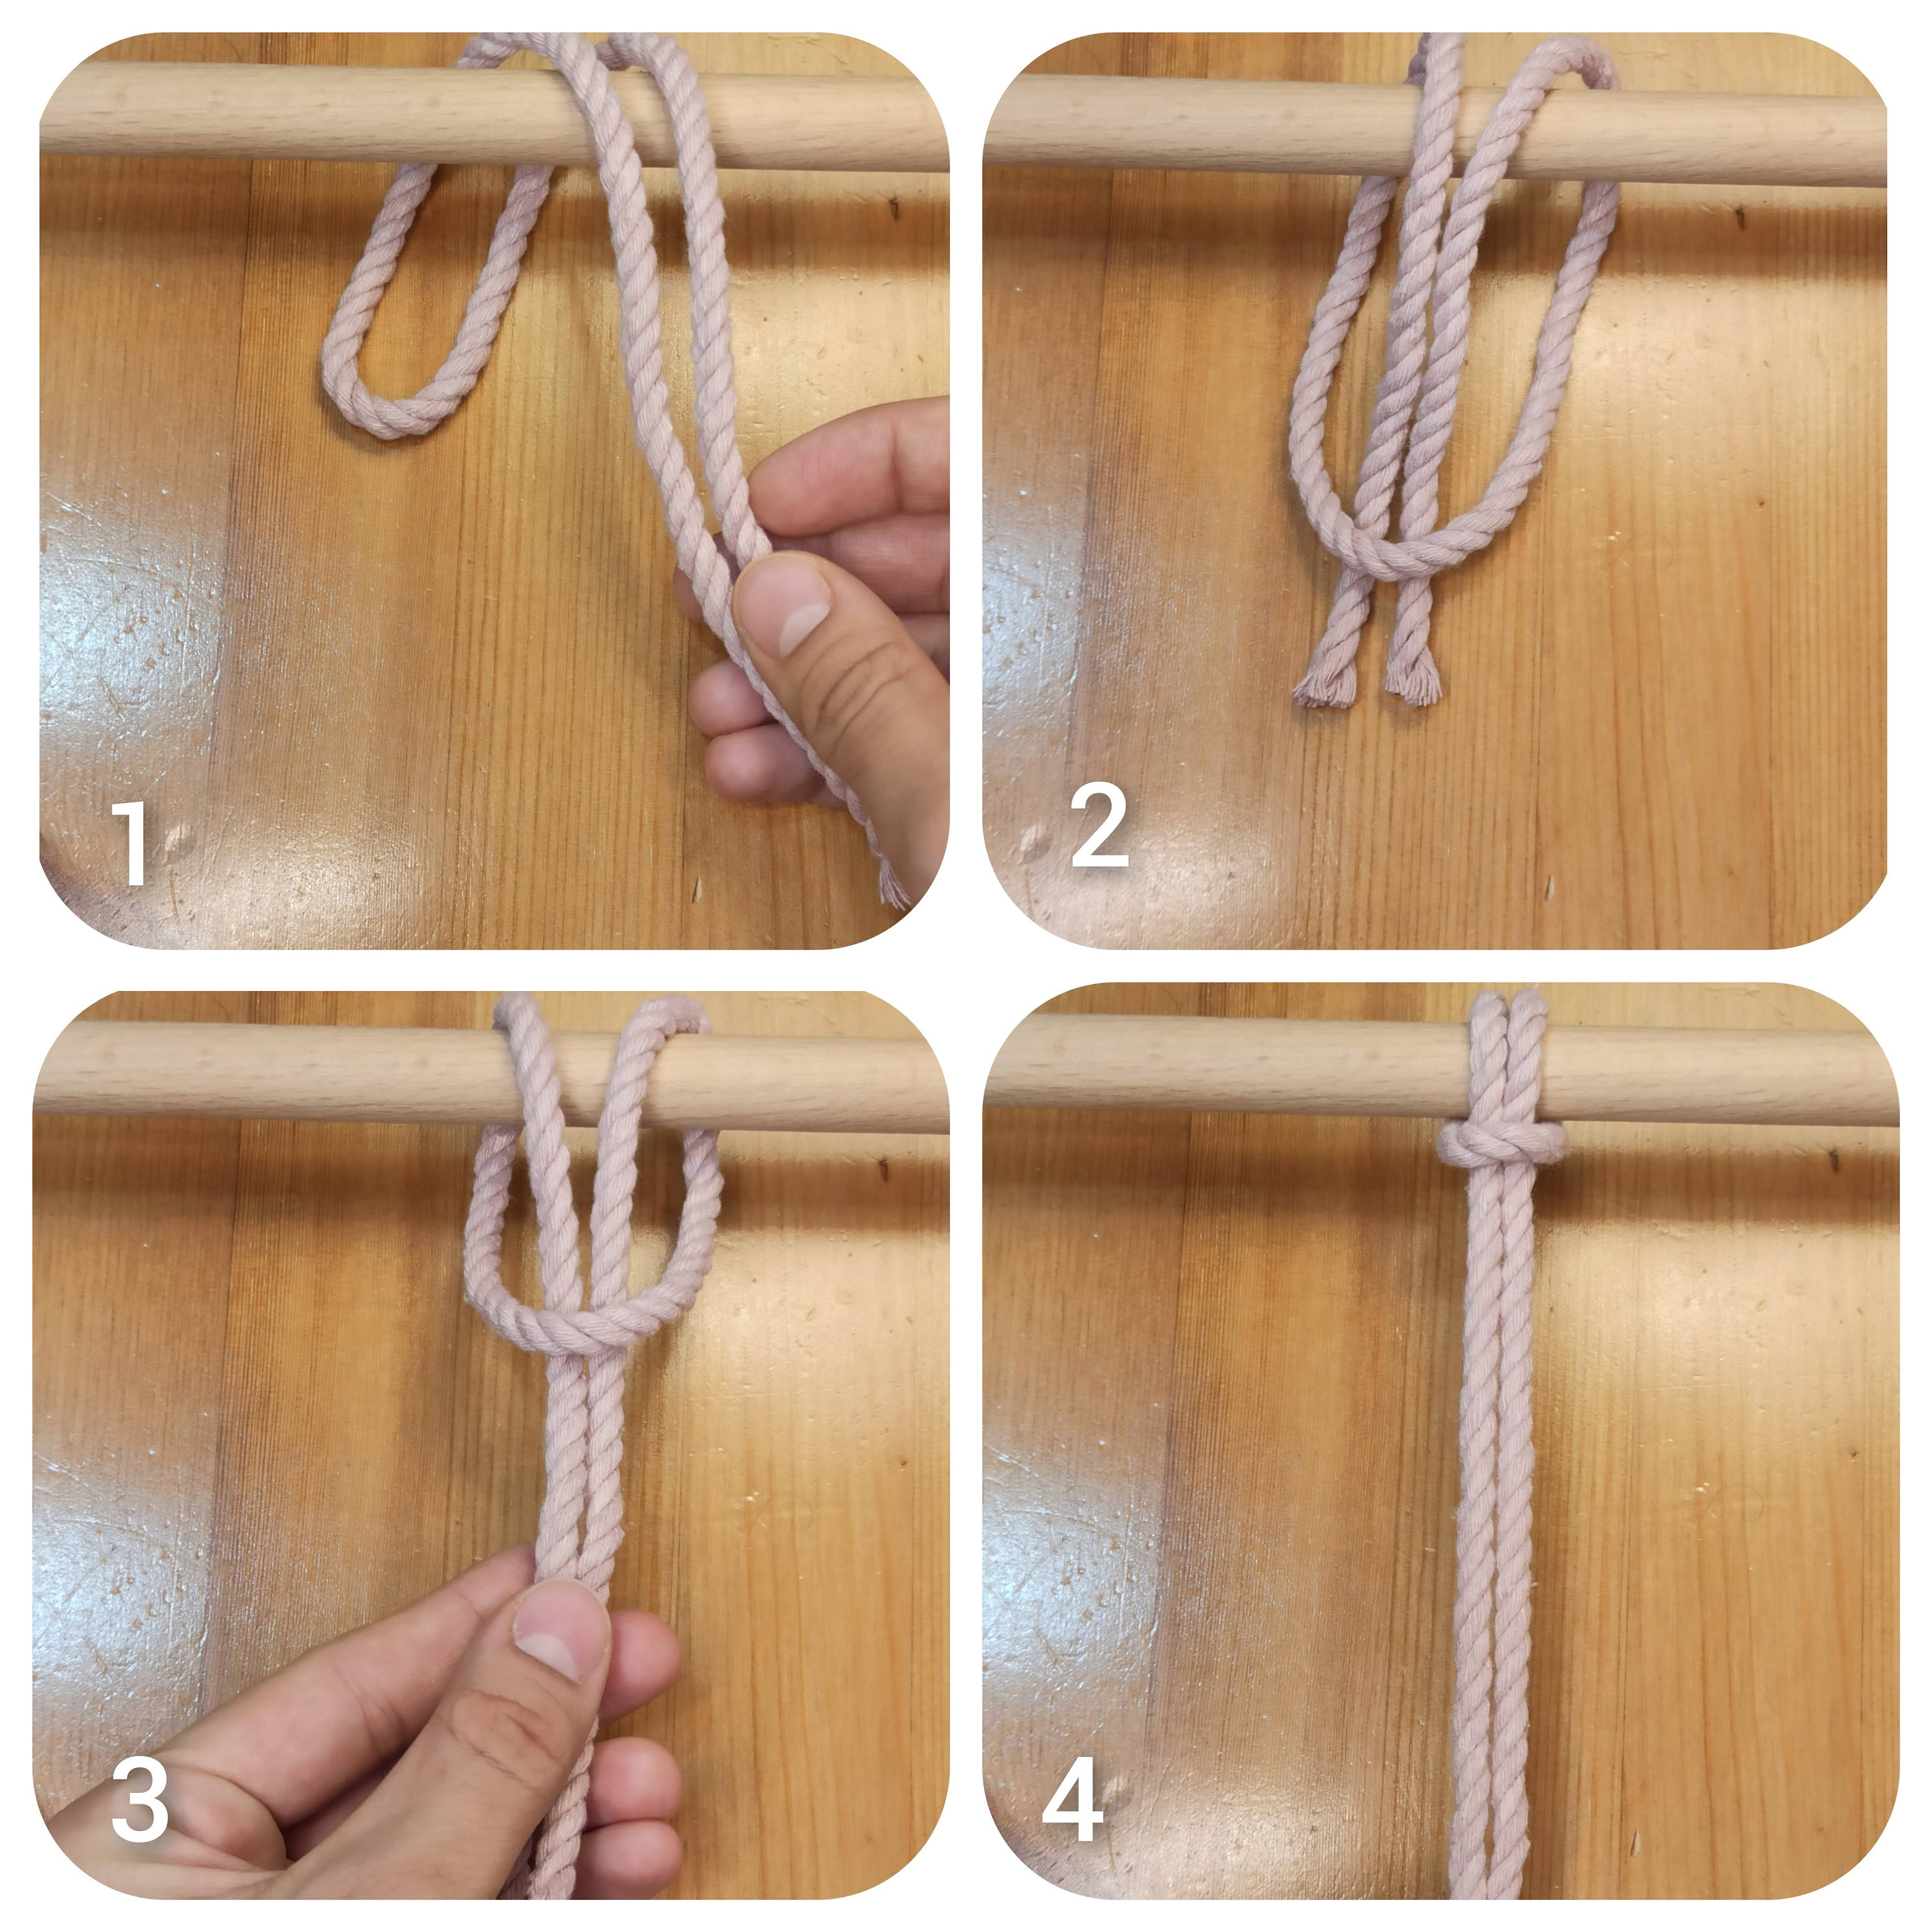 MACRAME BOOK FOR BEGINNER: Detailed guide on how to make your own Macramé  with various knots